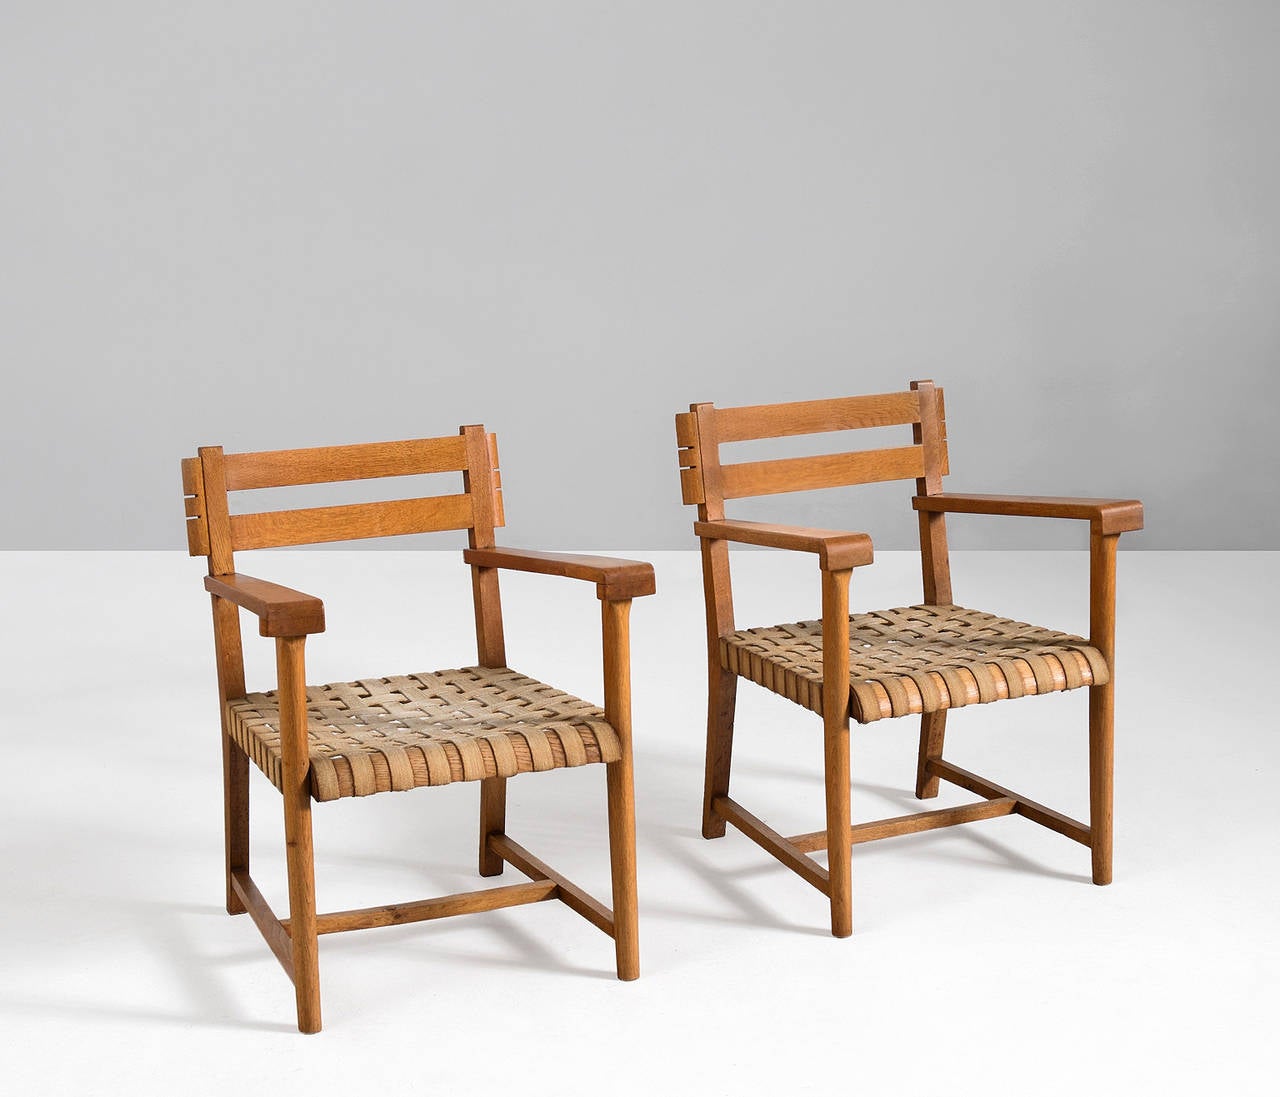 Set of armchairs, in oak and canvas, France 1940s. 

Sculptural pair of late Art Deco easy chairs, with their original canvas upholstery. The oak frame is well-designed and featured really nice construction details. A very solid yet elegant